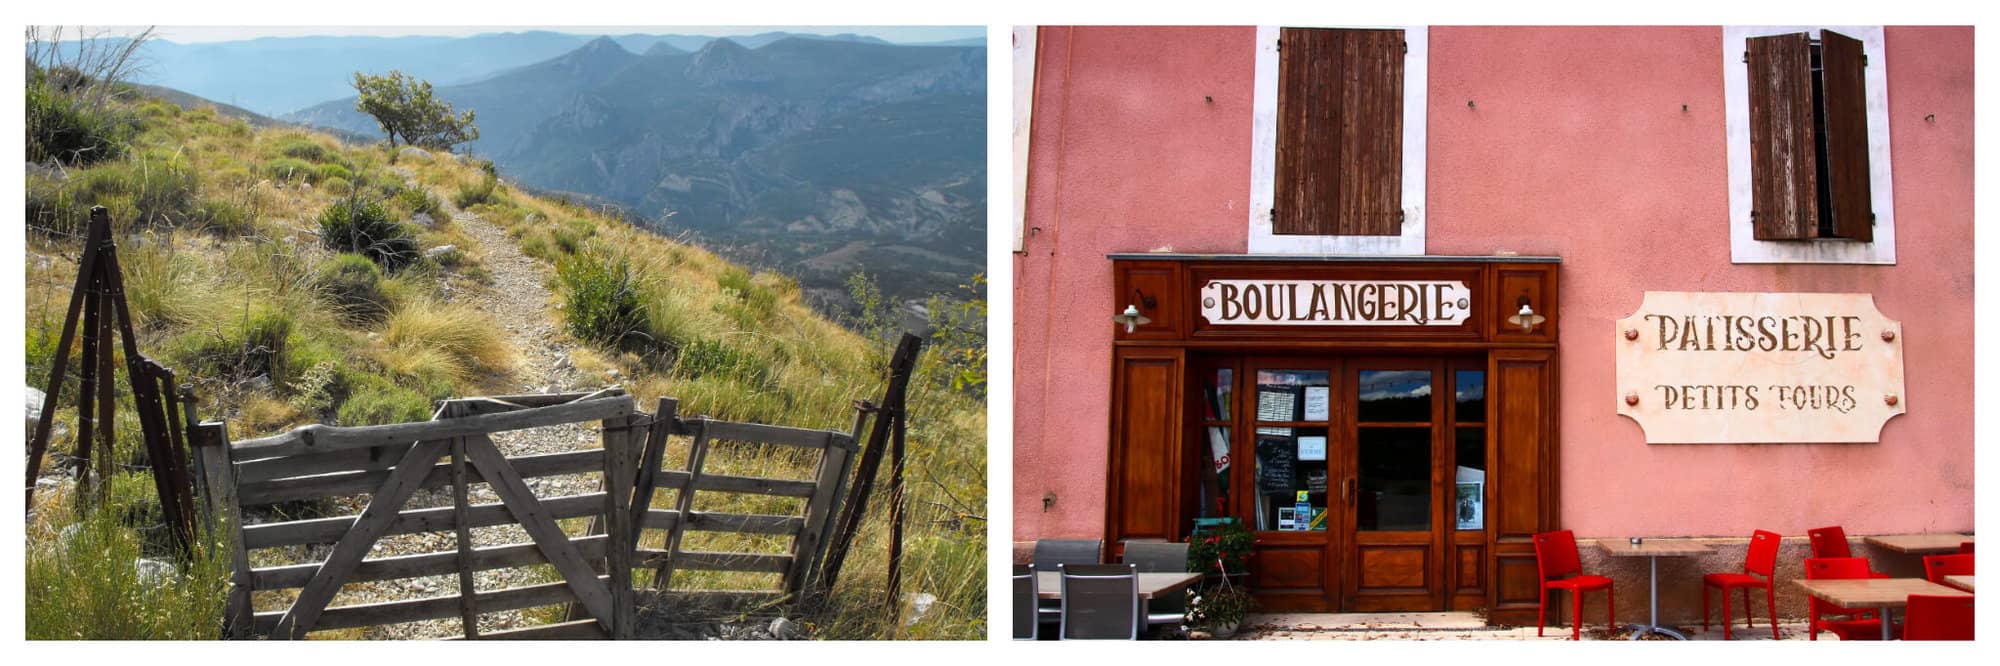 Left: A path in the mountains with grass and other greenery. There is a wooden gate at the beginning of the path. Right: The front of a boulangerie. The walls are red and there are wooden shutters. There are signs in French and tables with red chairs.